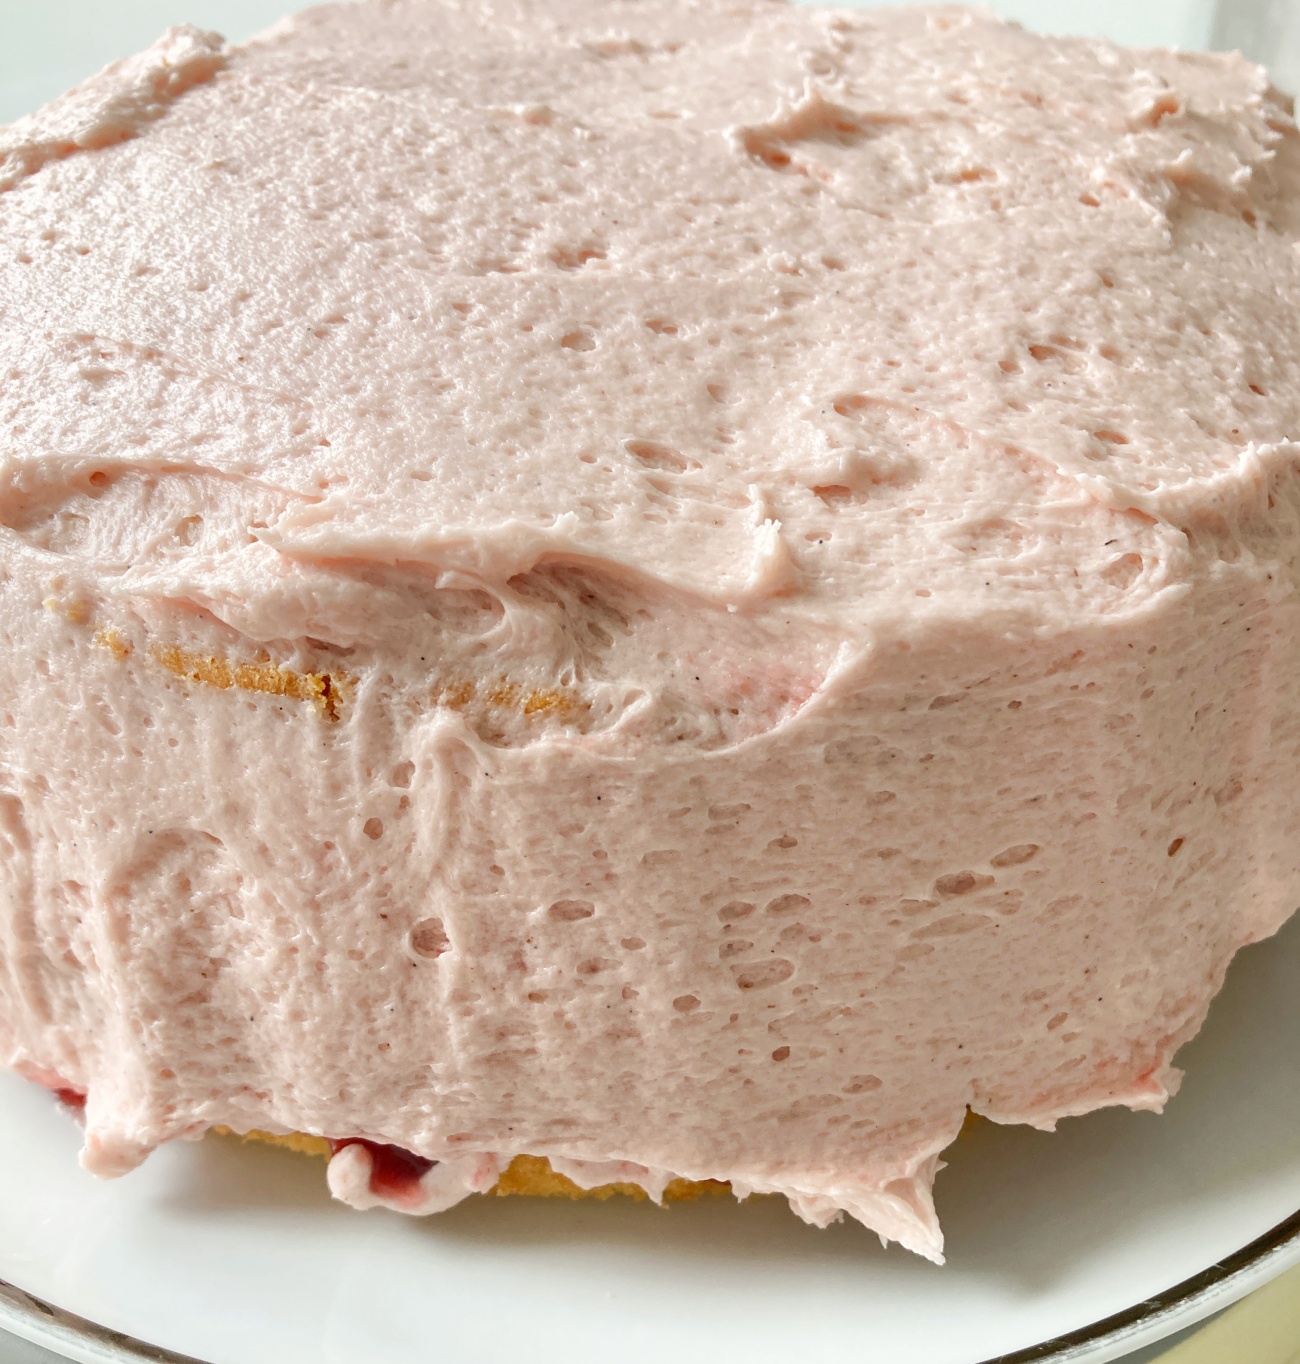 Add second cake on top and cover entire cake in a layer of raspberry frosting. Use a frosting comb to decorate or pipe on rosettes on top using plain or raspberry frosting.